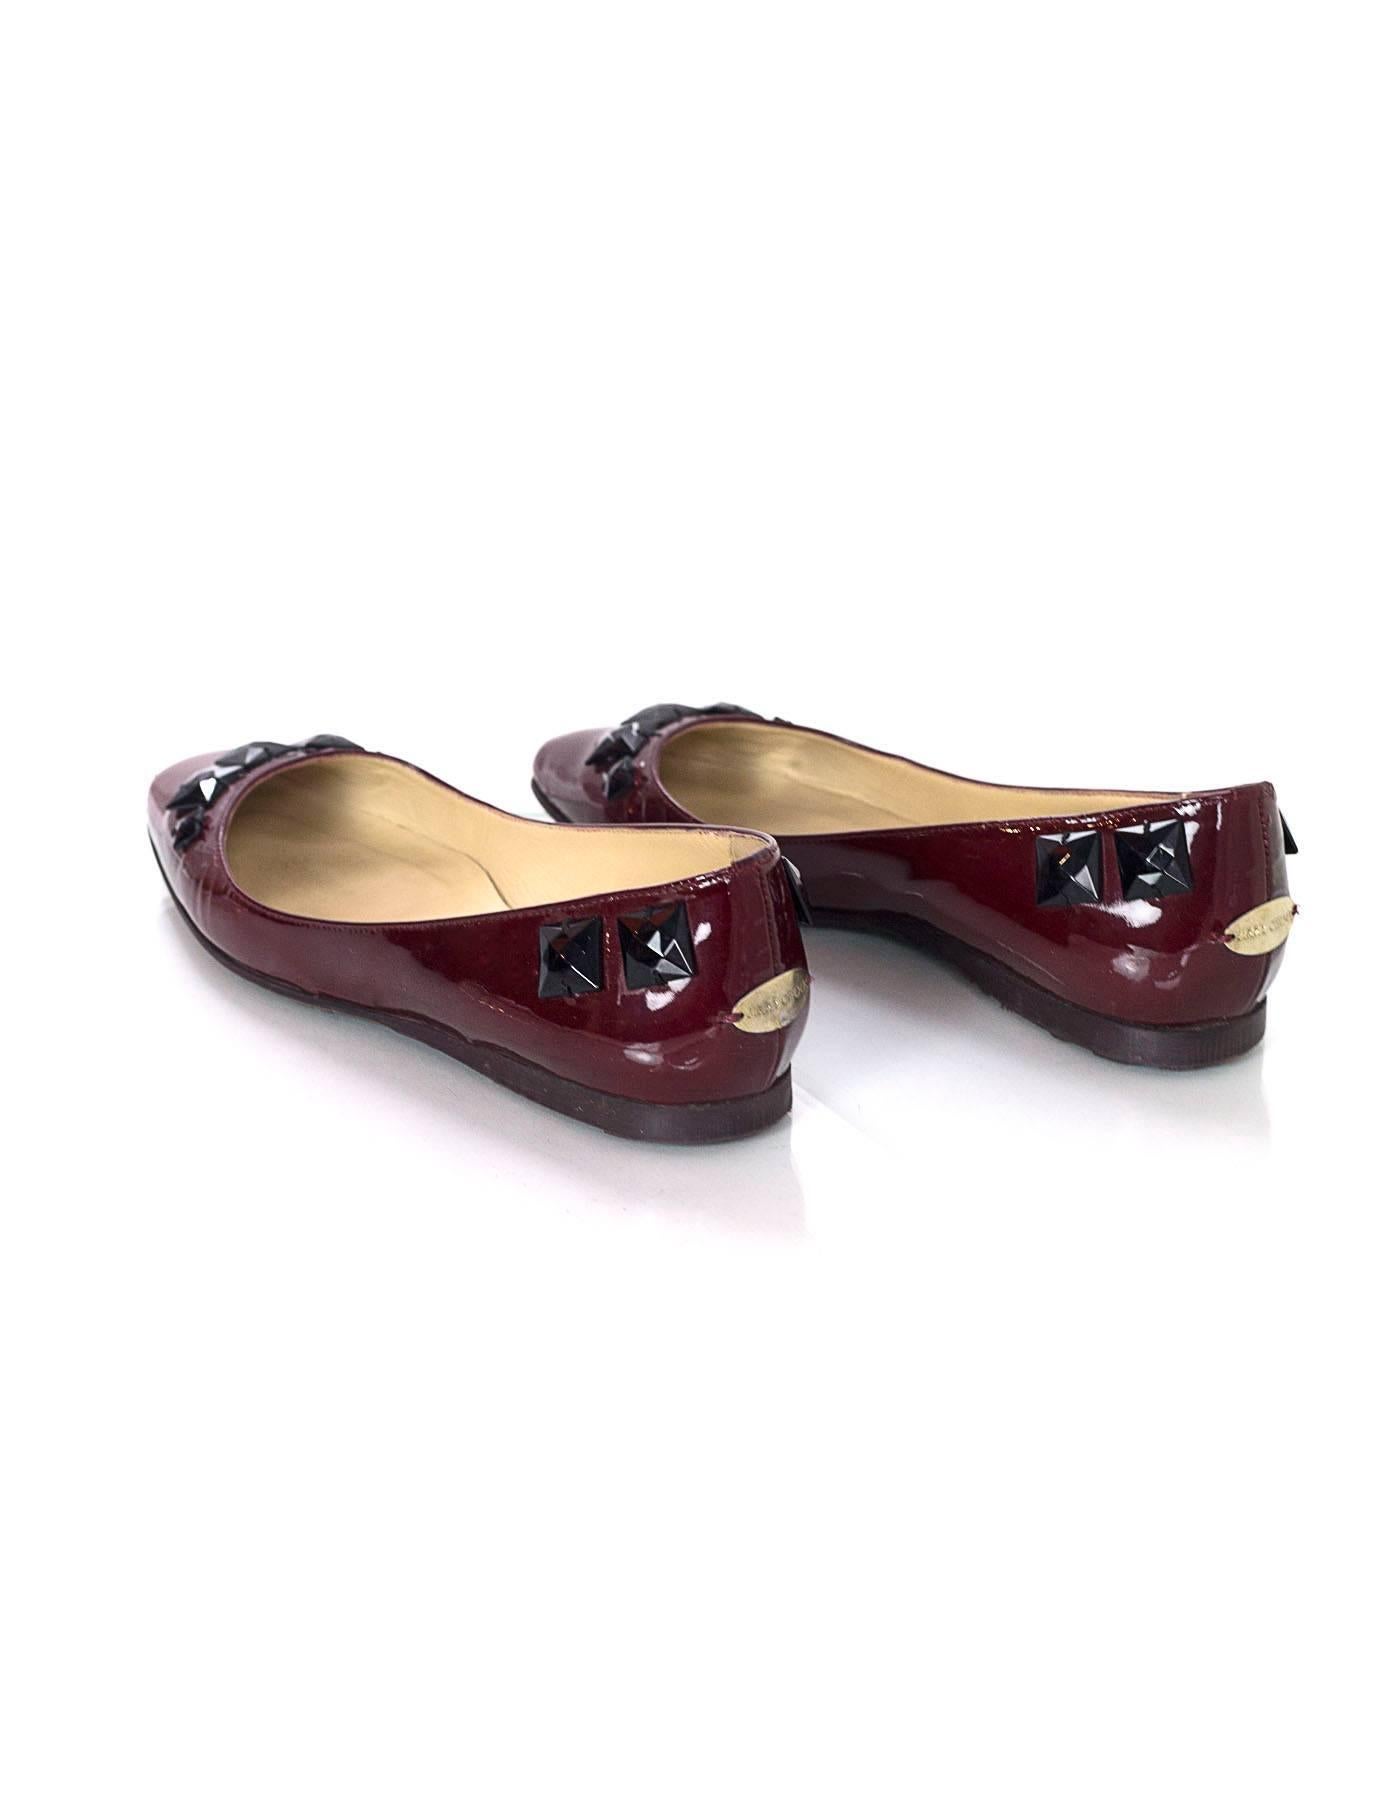 Jimmy Choo Burgundy Patent Leather Flats With Studs Sz 37.5 In Good Condition In New York, NY